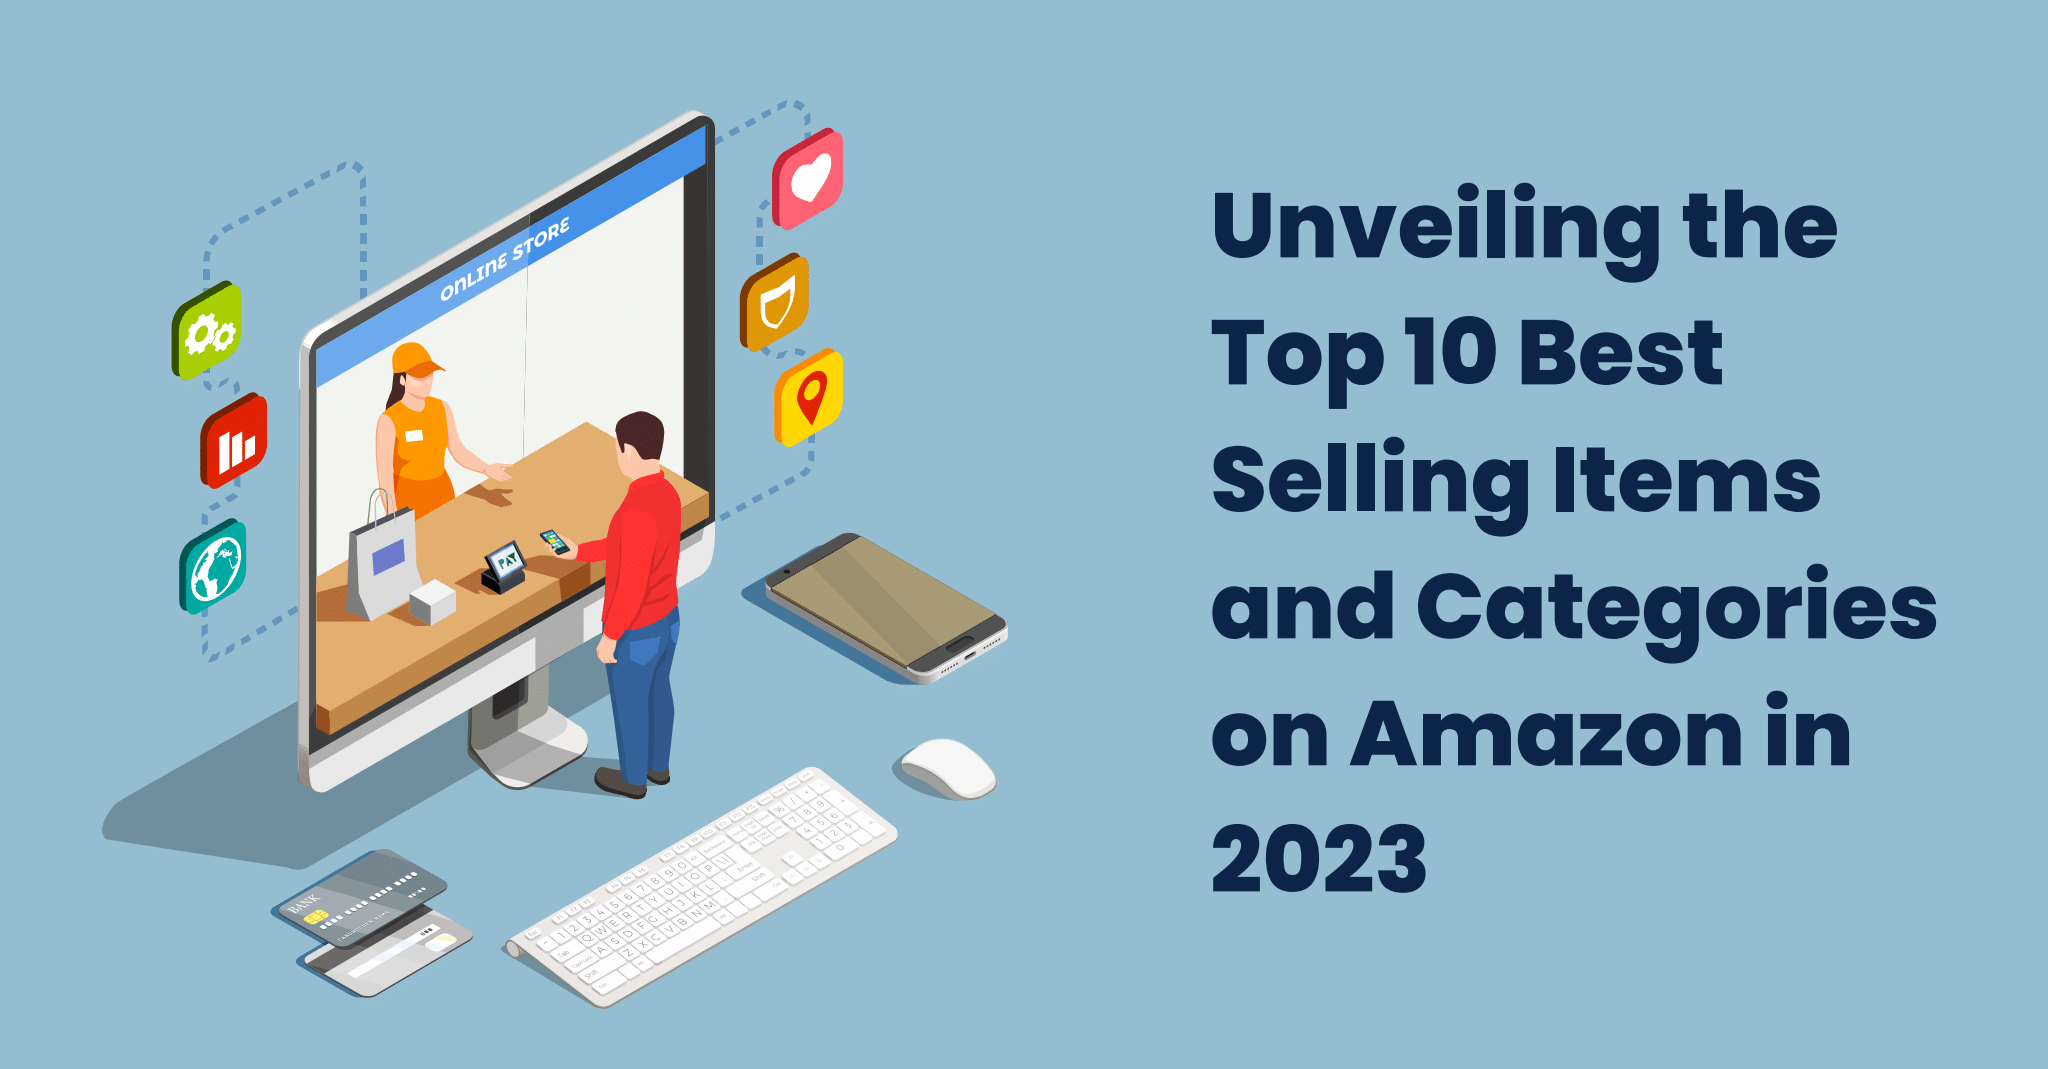 Unveiling the Top 10 Best Selling Items and Categories on Amazon in 2023